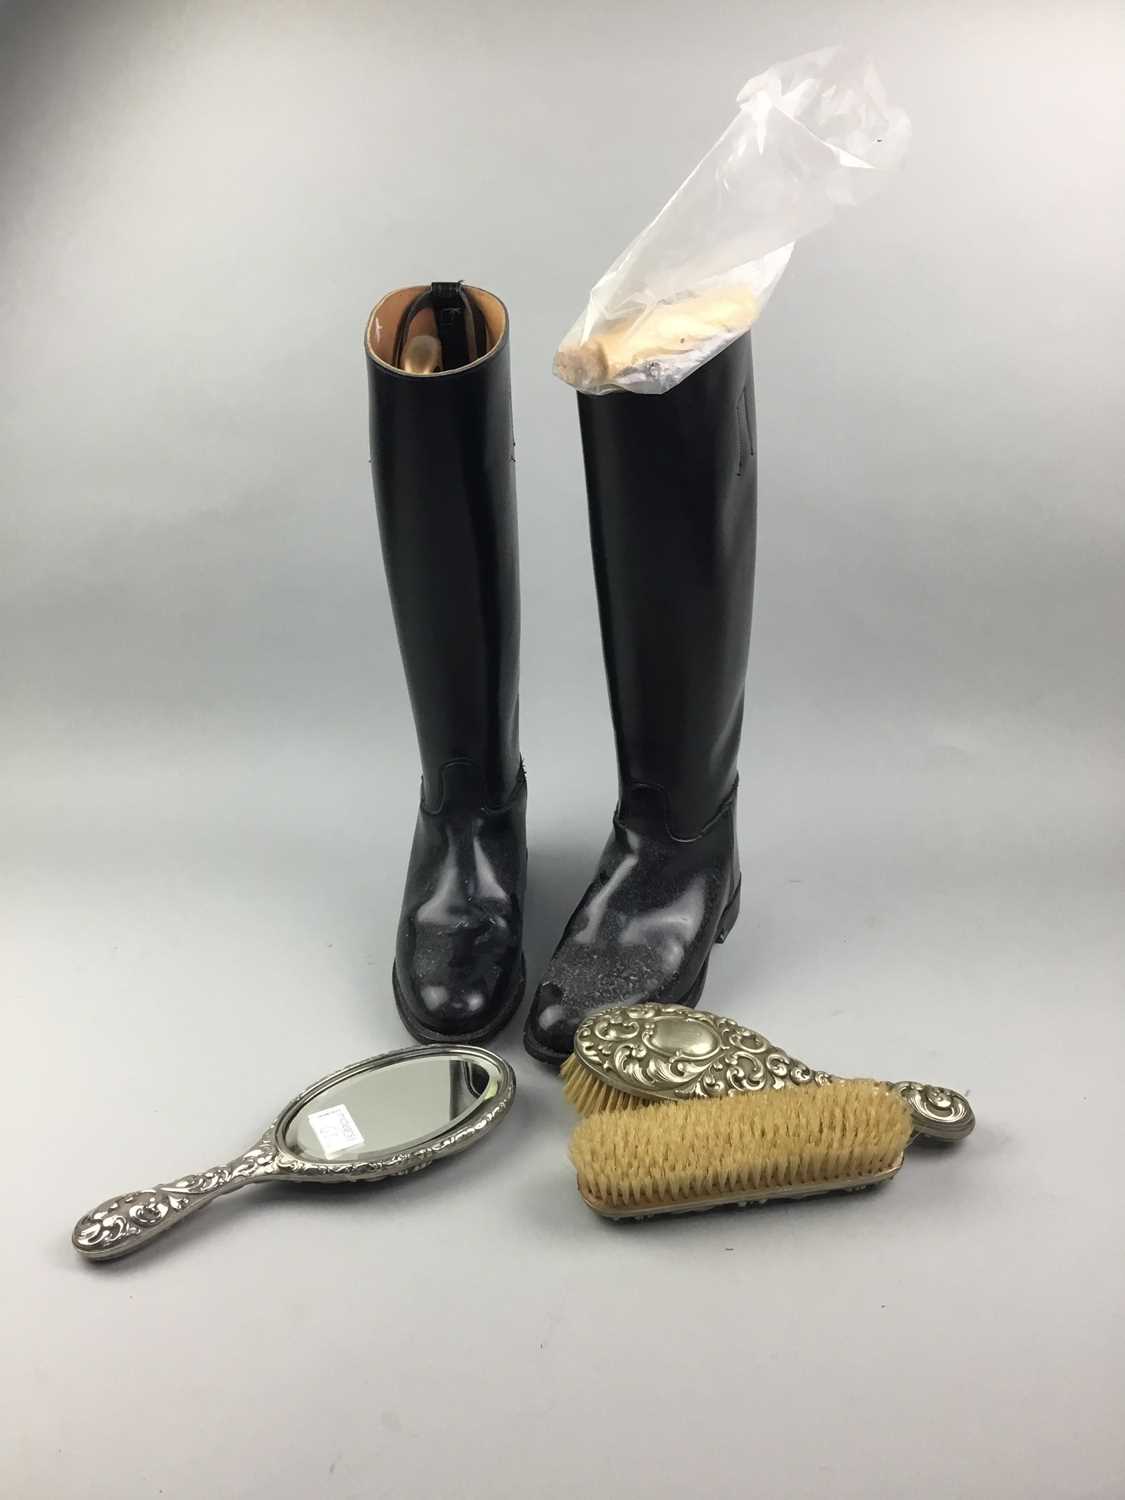 Lot 62 - A PAIR OF LADY'S REGENT RIDING BOOTS AND A WHITE METAL BACKED BRUSH SET